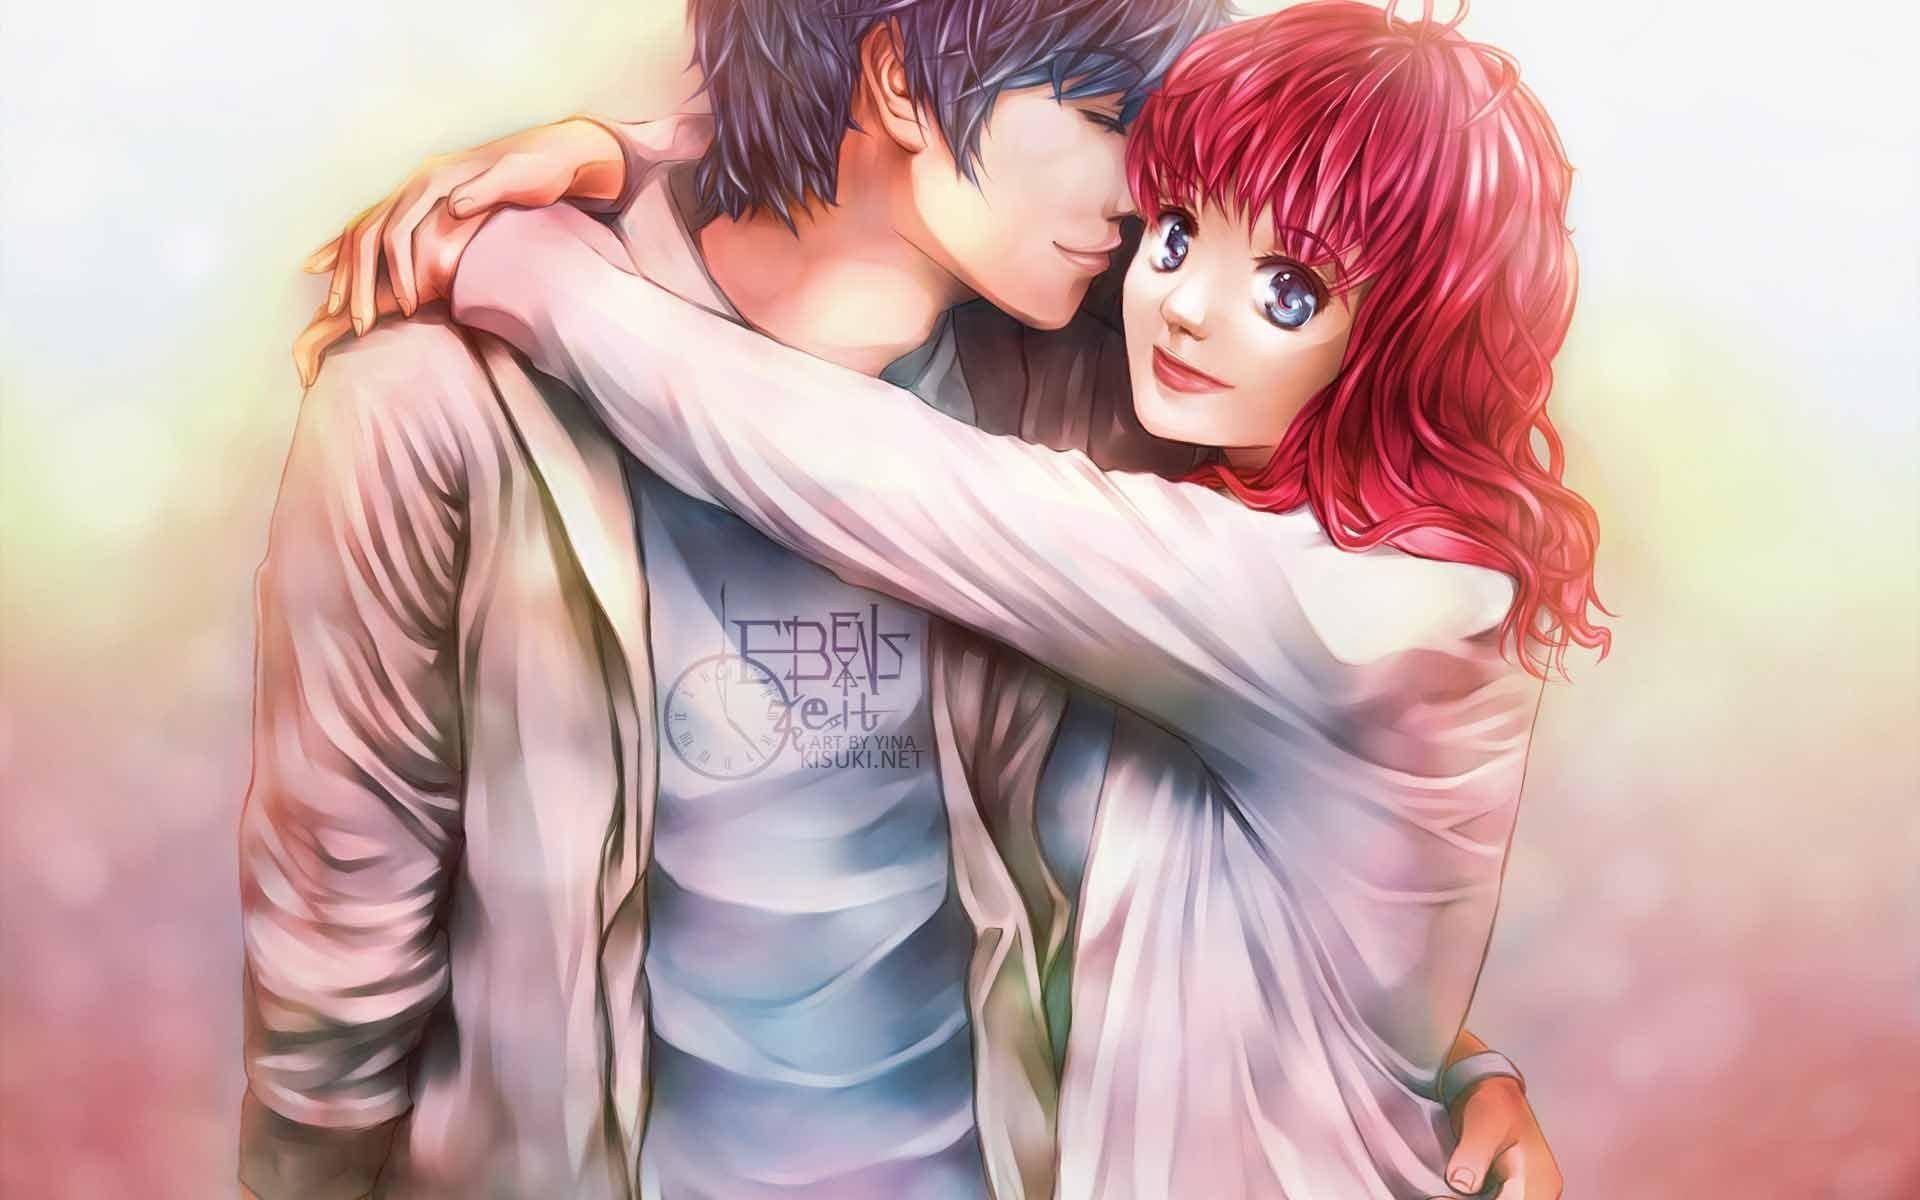 New Cute Anime Couple Wallpaper for iPhone